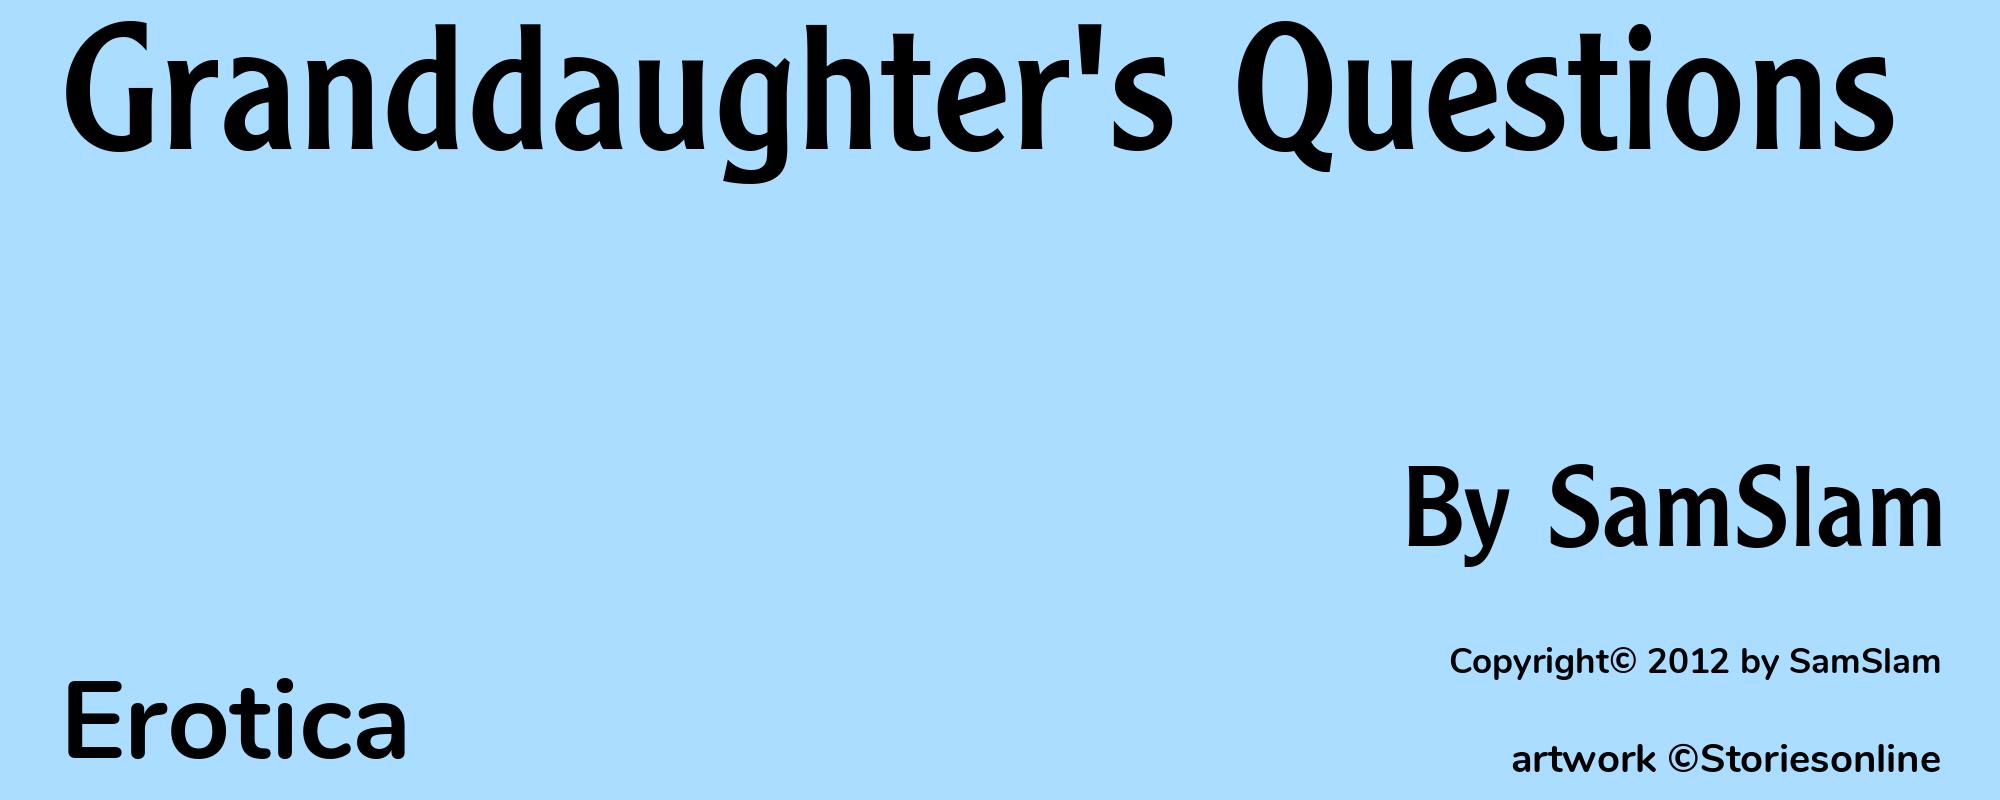 Granddaughter's Questions - Cover